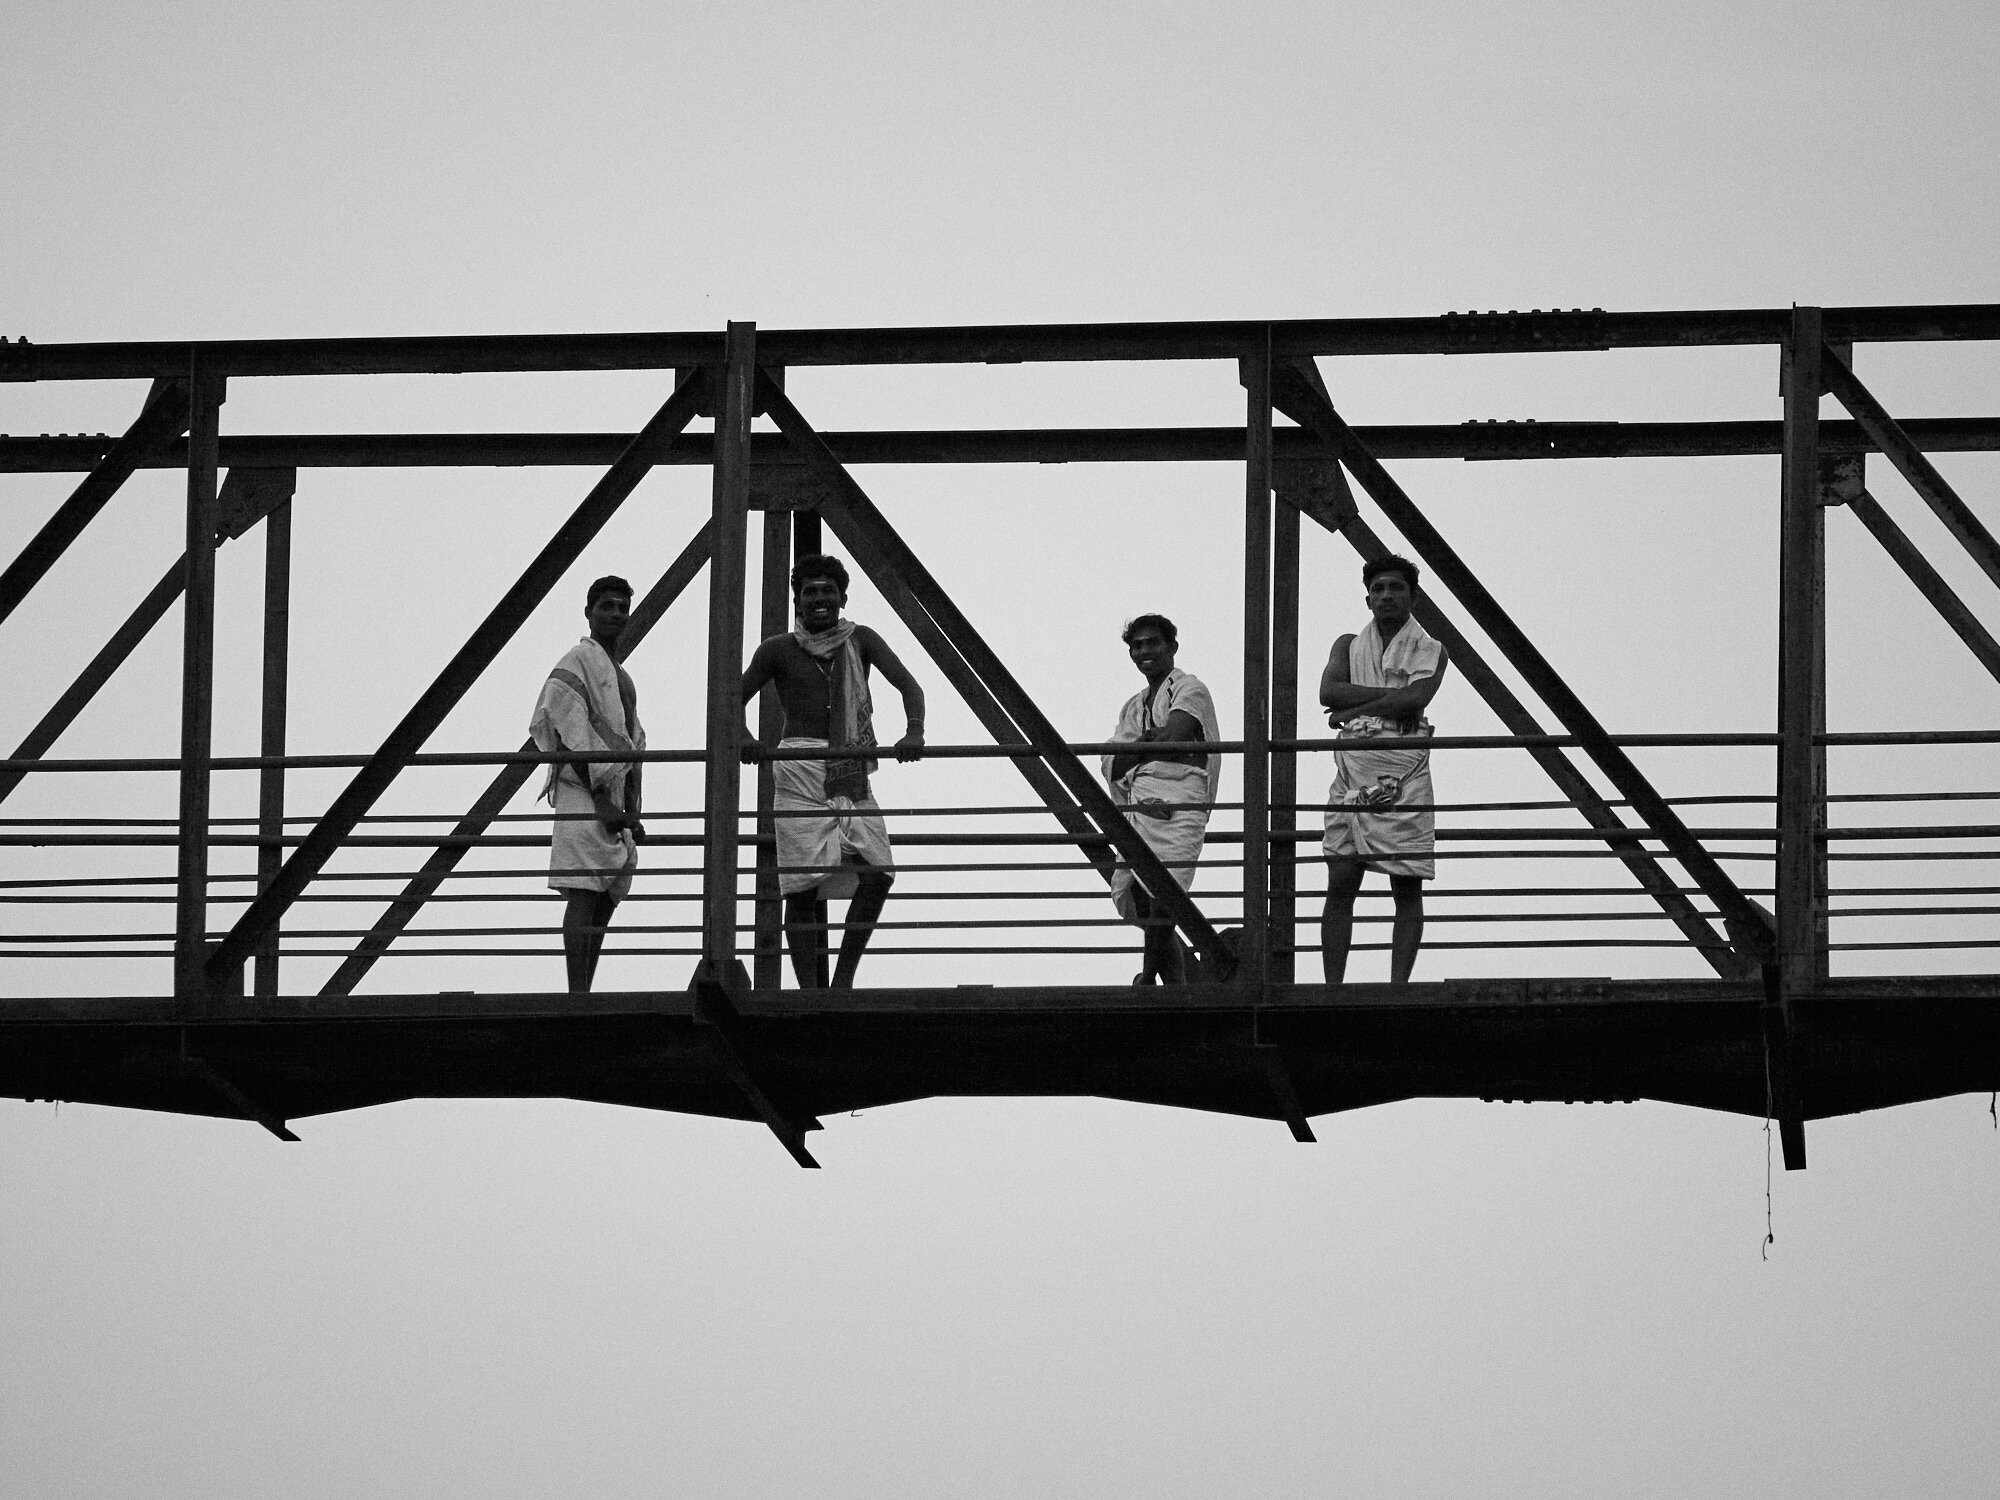  A group of young men dressed up in the traditional veshti standing over a bridge in Alappuzha, Kerala. 